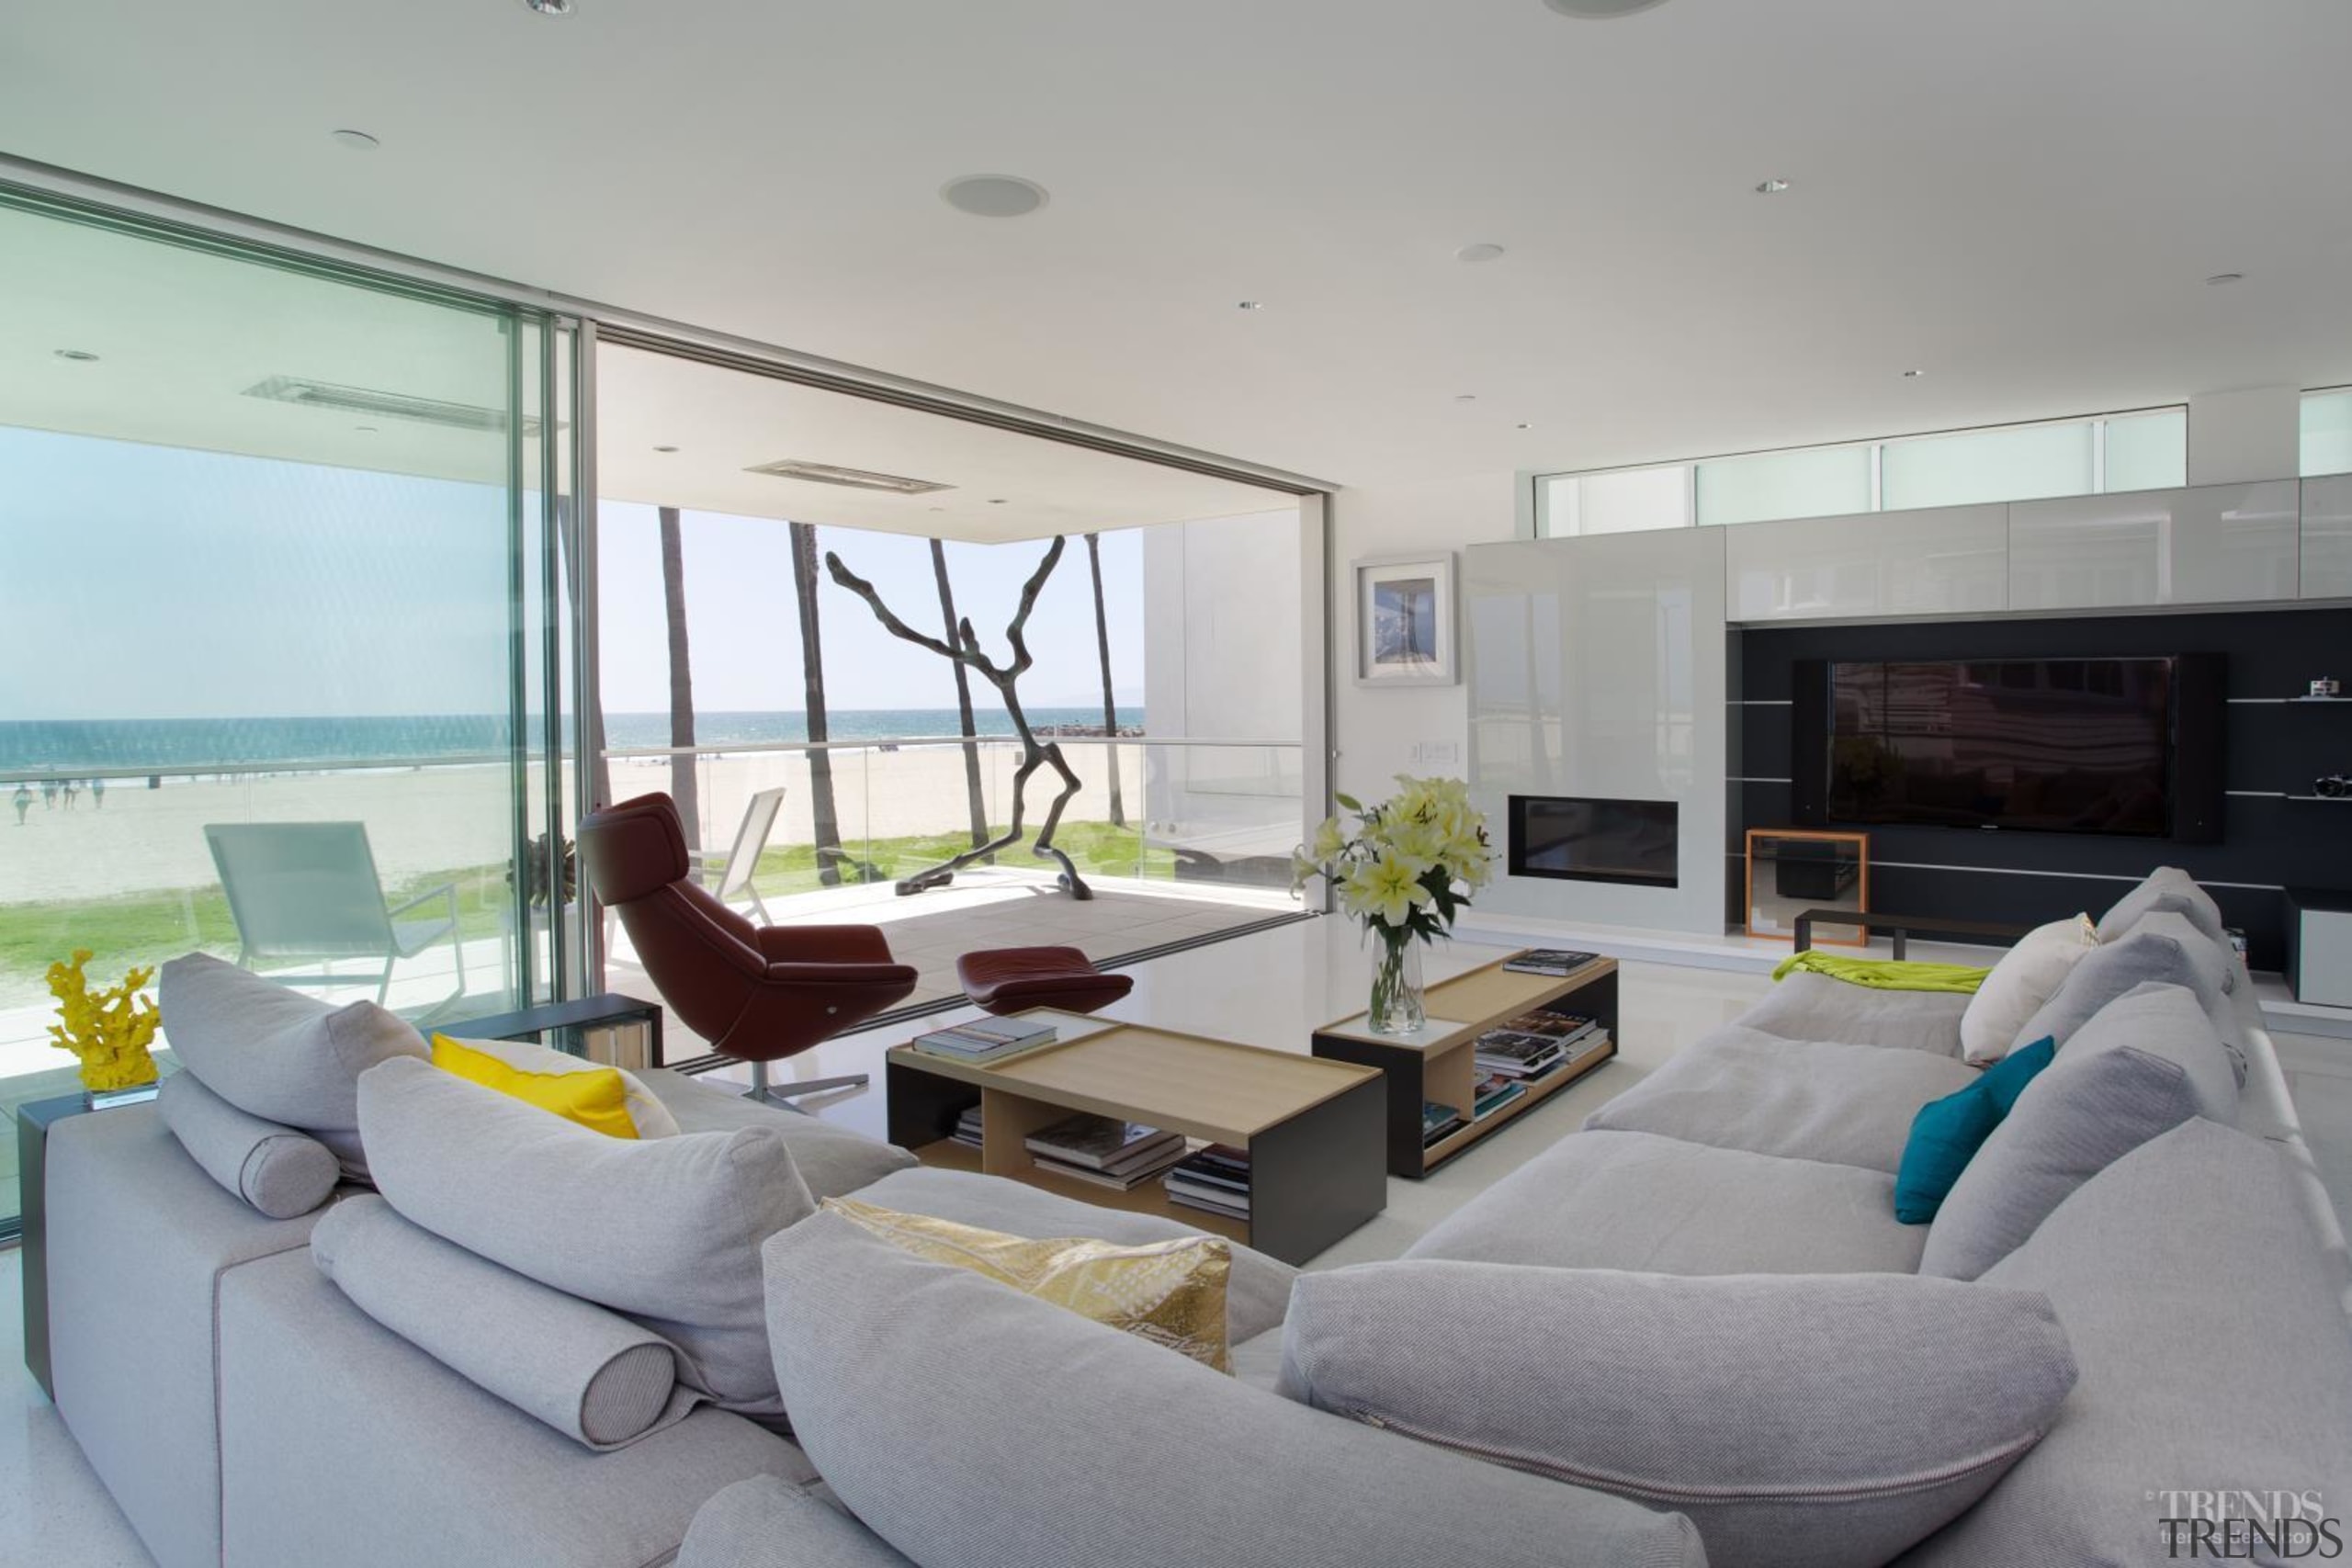 The light-filled living room in this contemporary beachfront architecture, house, interior design, living room, penthouse apartment, property, real estate, window, gray